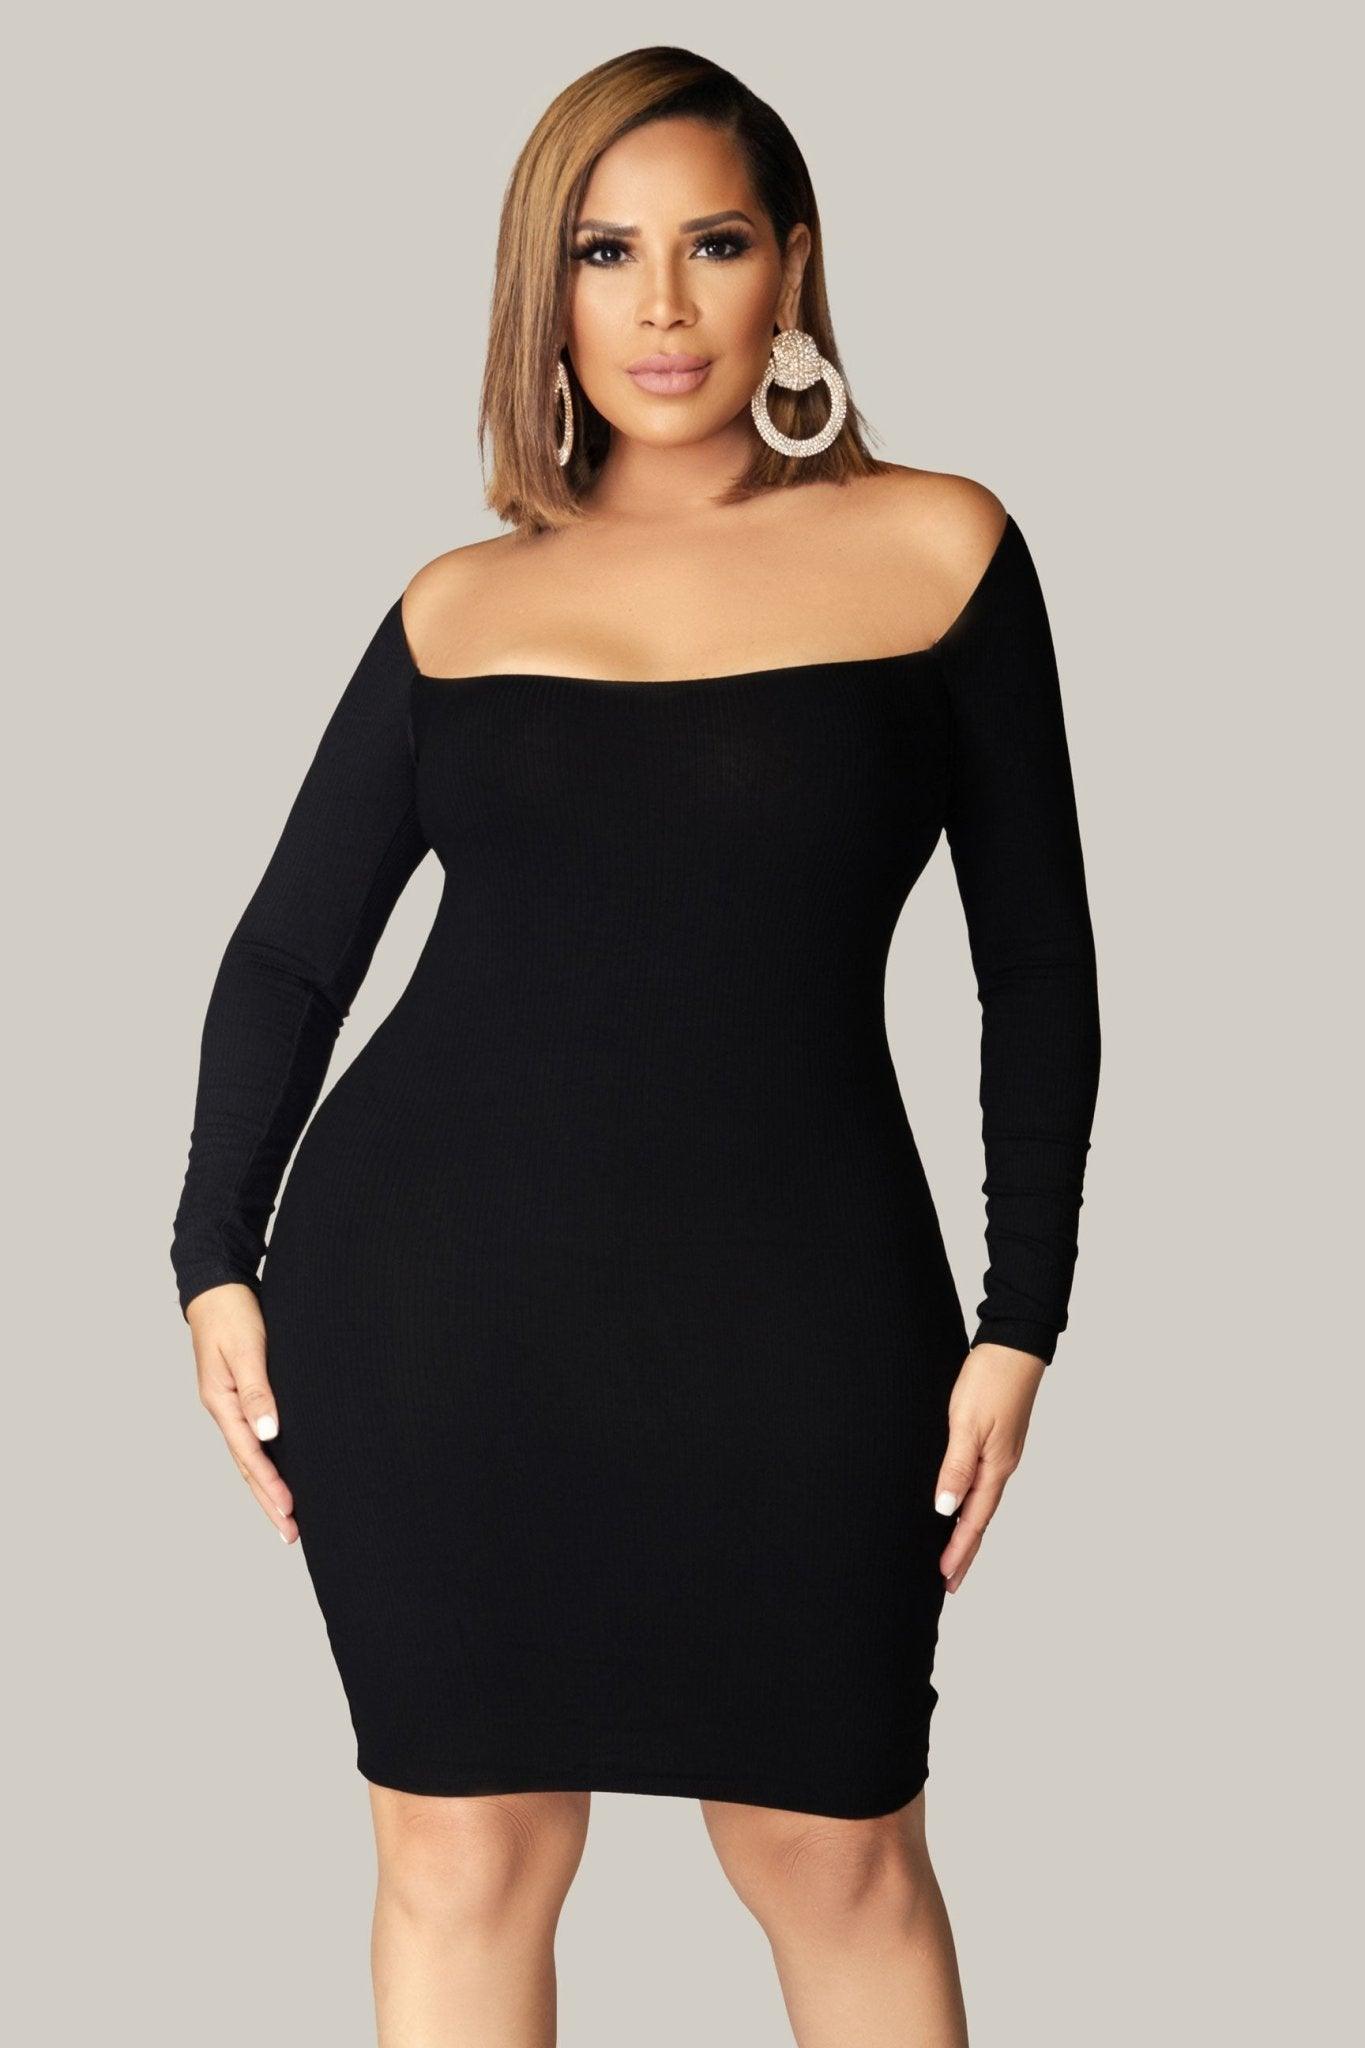 Presley Long Sleeve Square Neck Solid Ribbed Mini Dress - MY SEXY STYLES